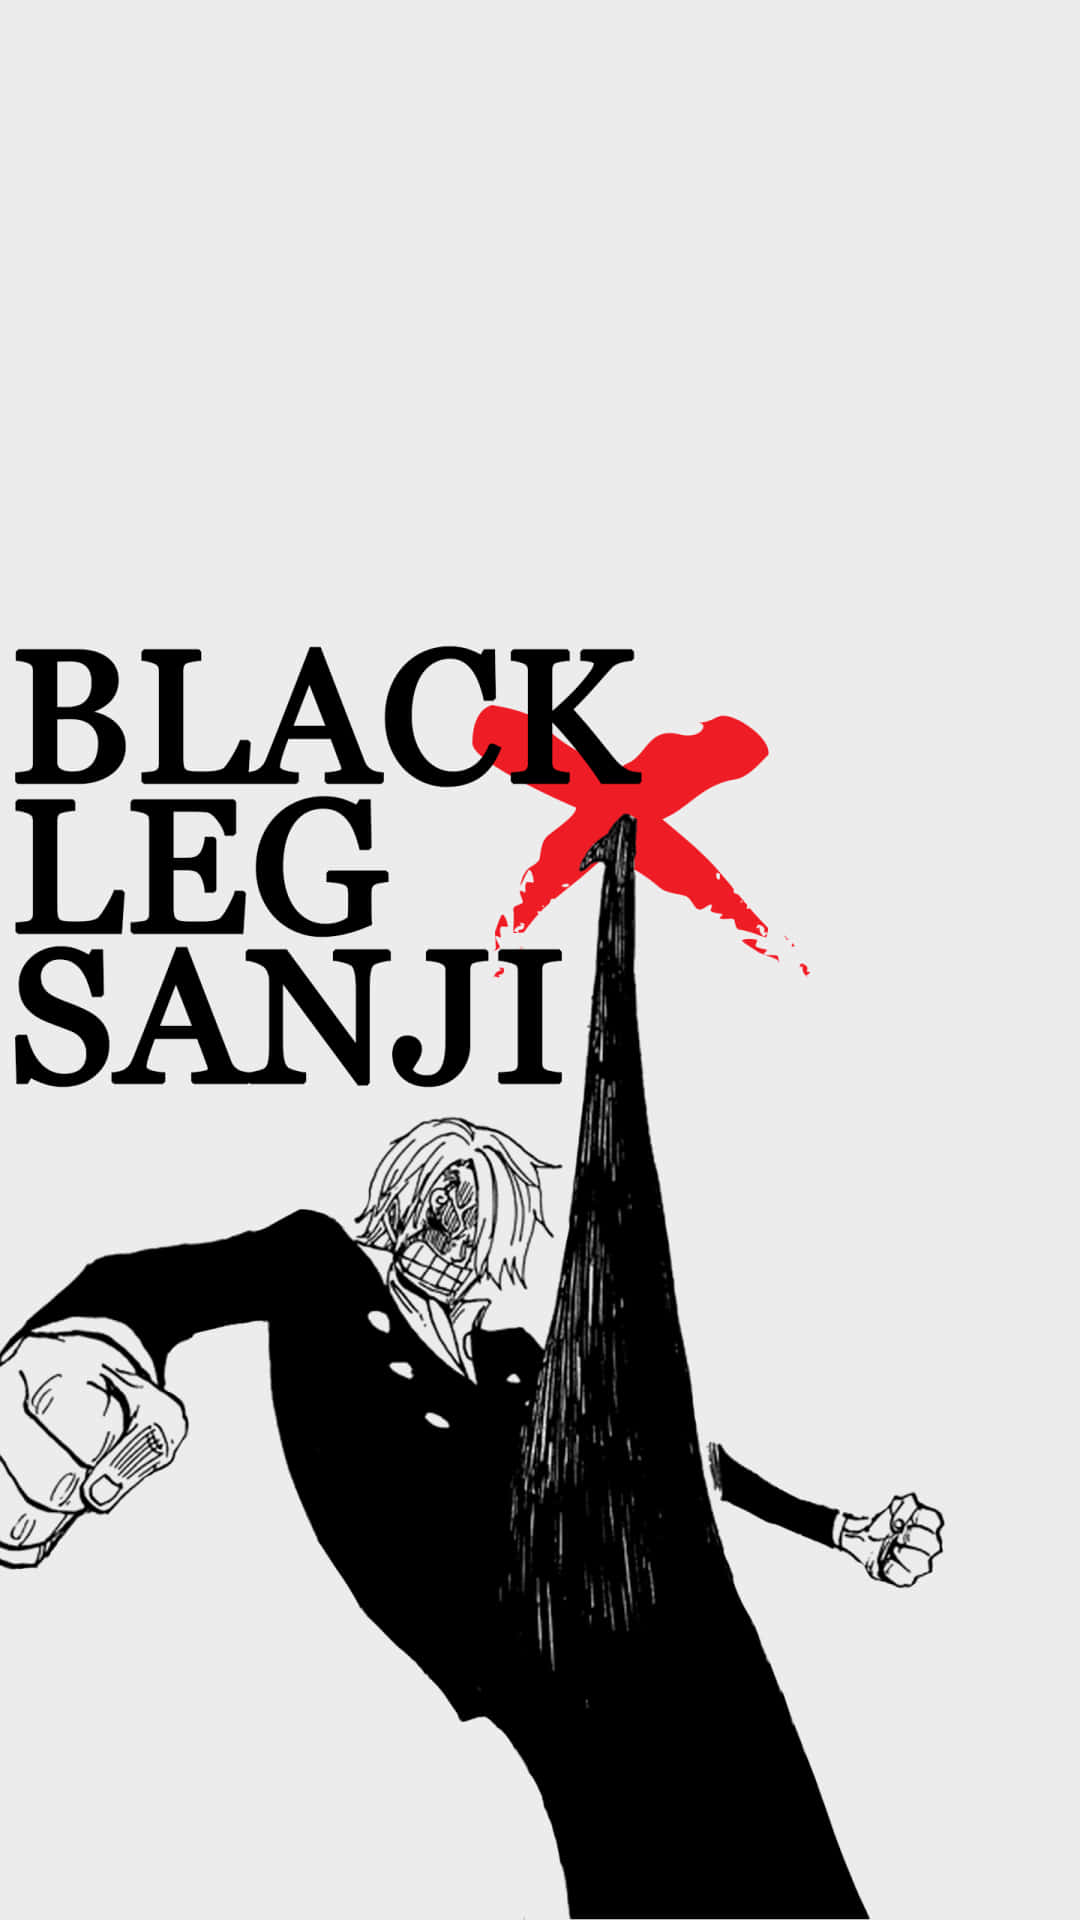 Sanji One Piece character in action on iPhone Wallpaper Wallpaper